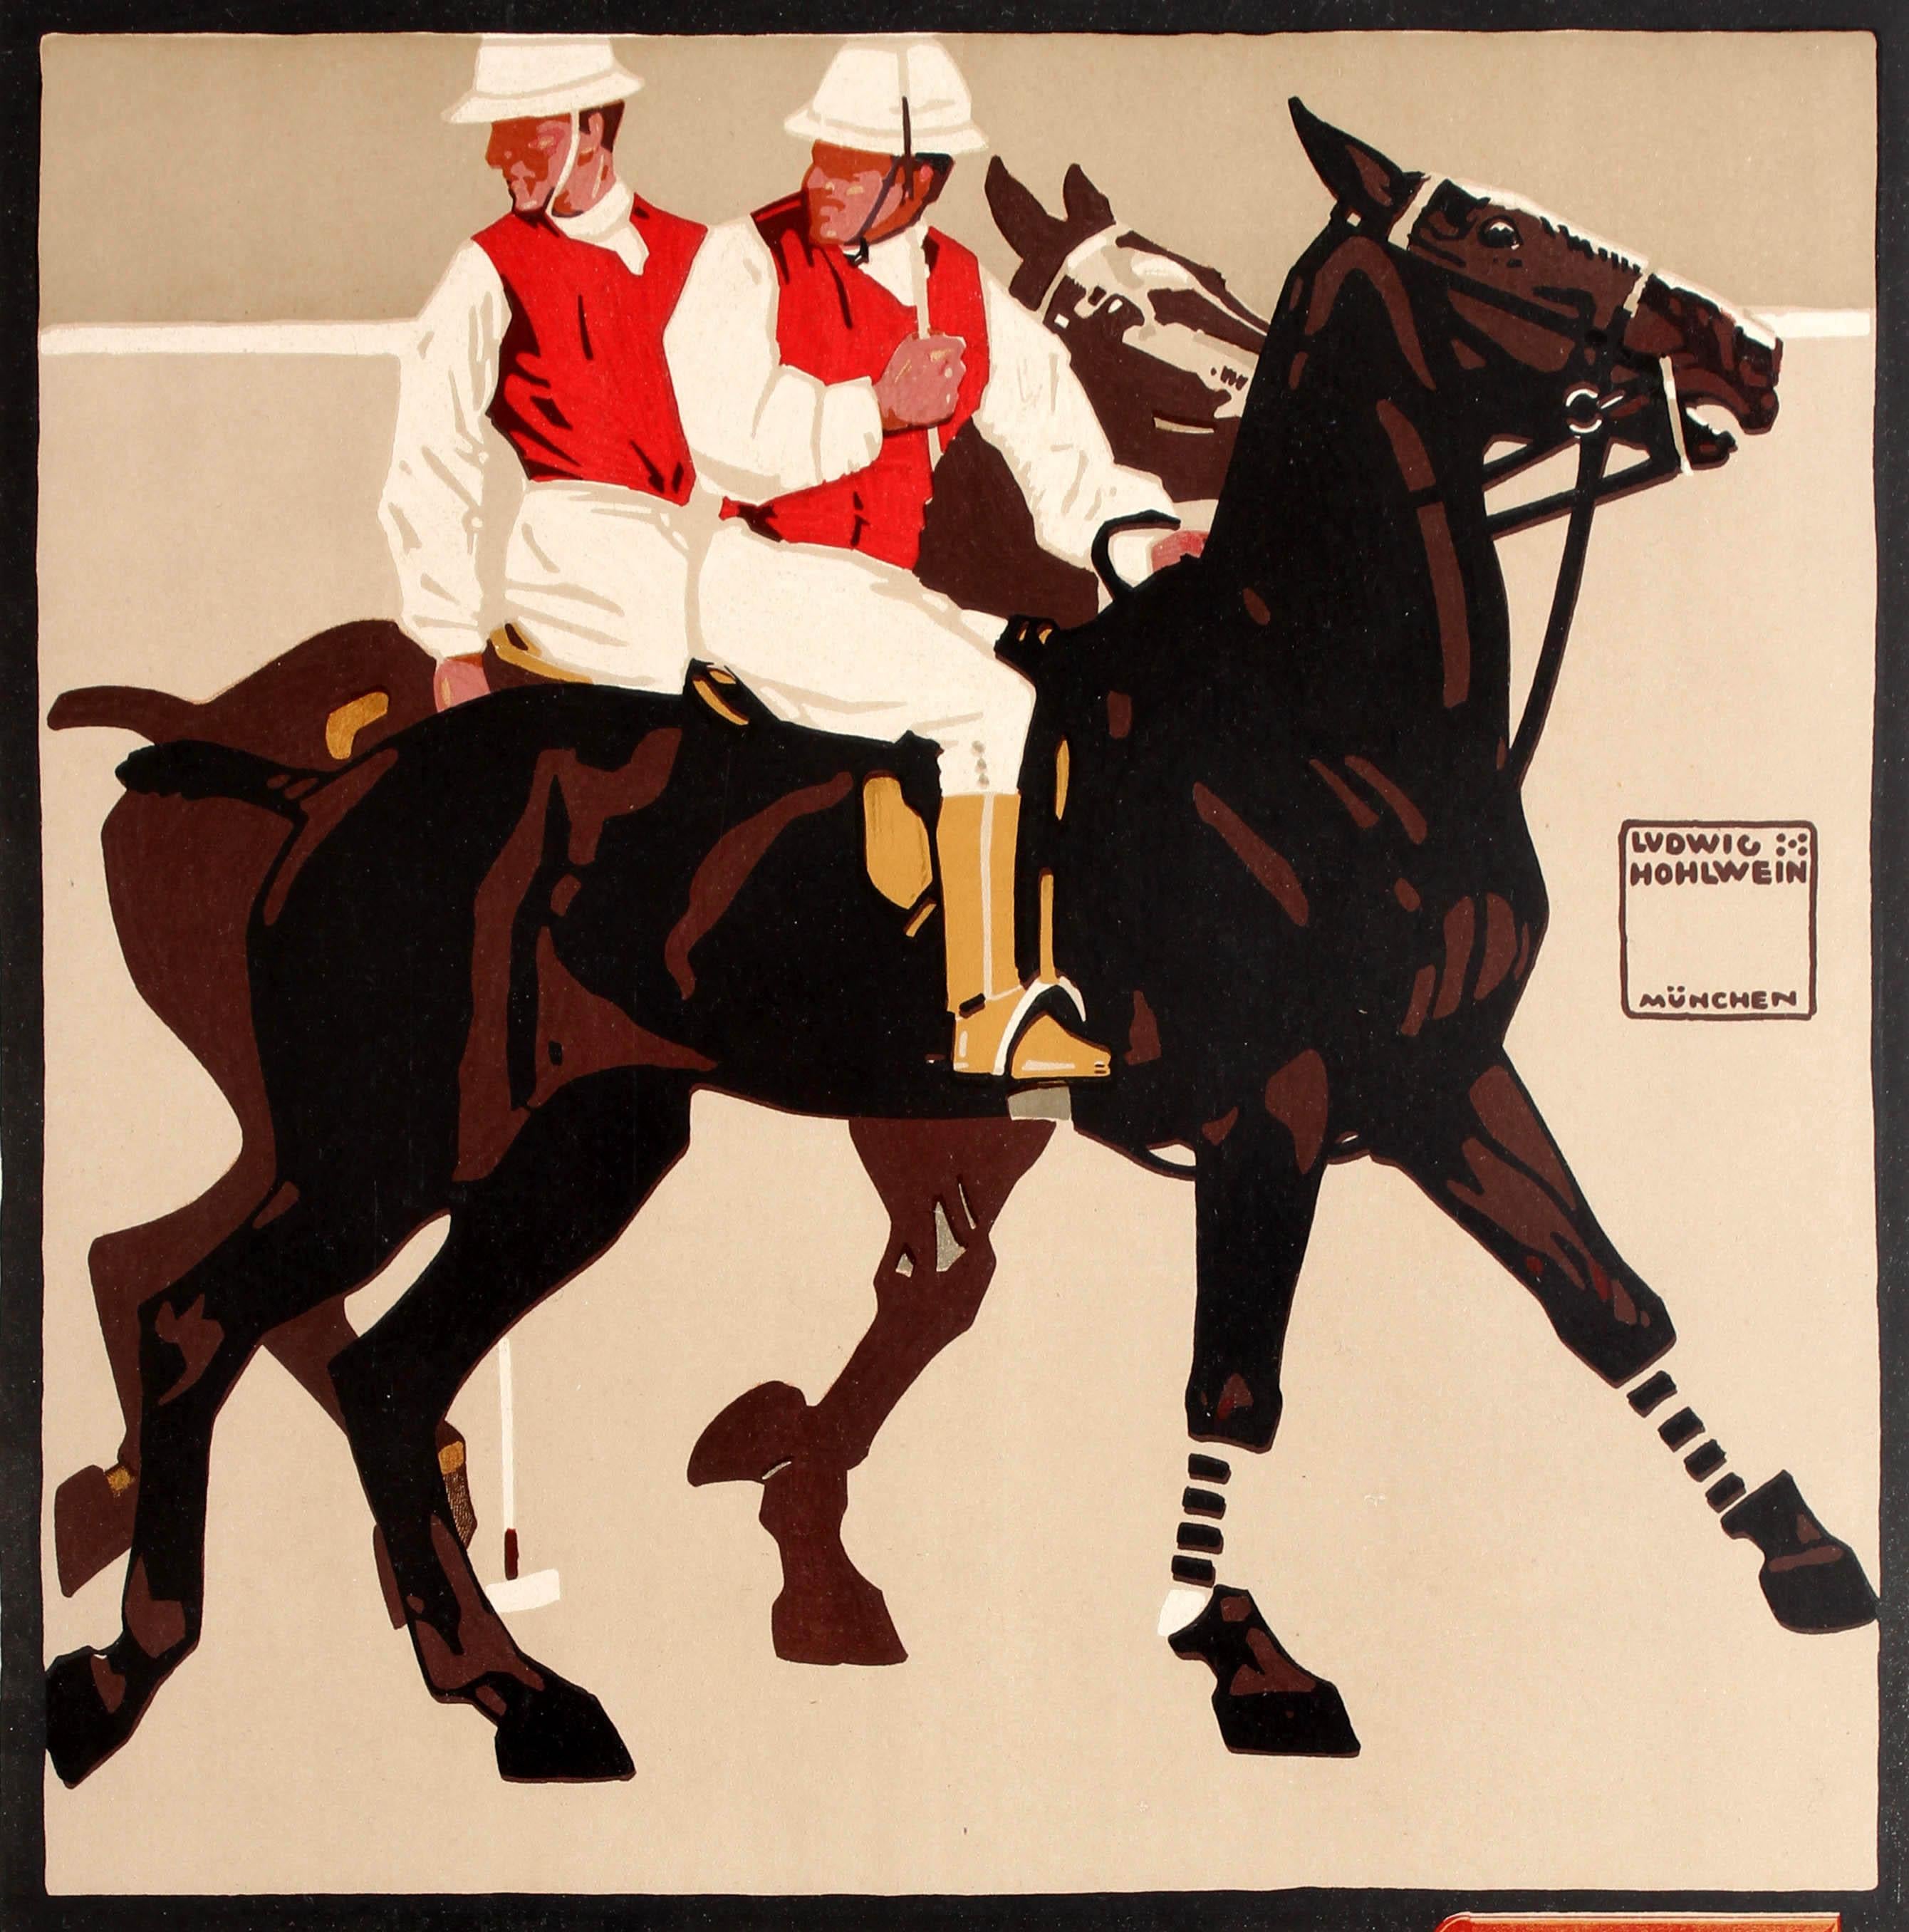 Original antique advertising poster for The Golden Book of Sports or Das Goldene Buch Des Sports by the notable German graphic artist Ludwig Hohlwein (1874-1949) featuring a great image of two polo players on their horses with the text above and